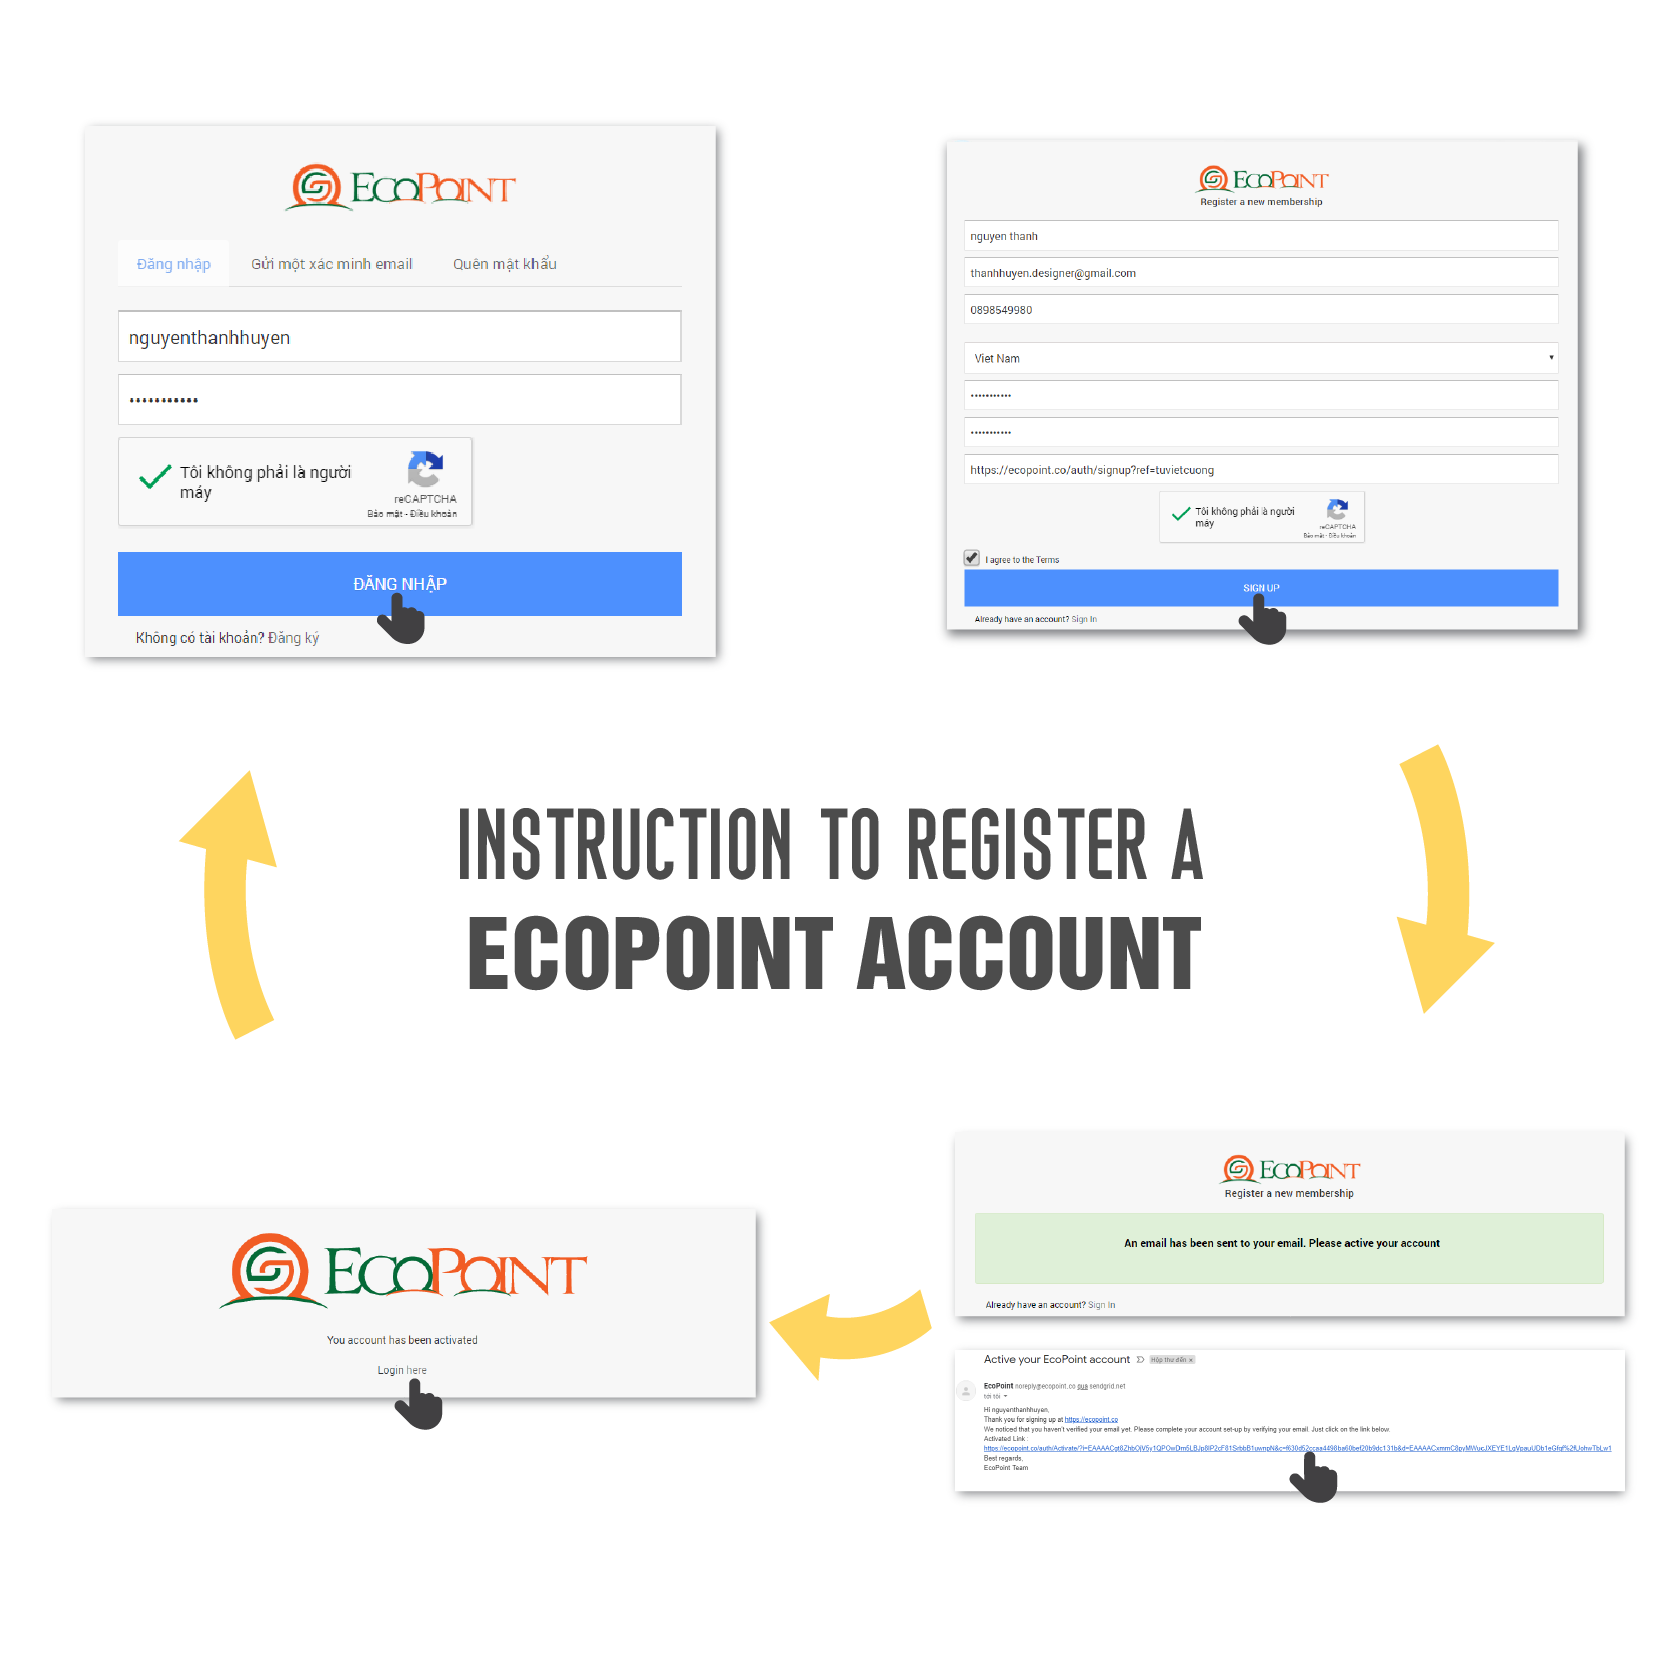 Sign Up for Ecopoint